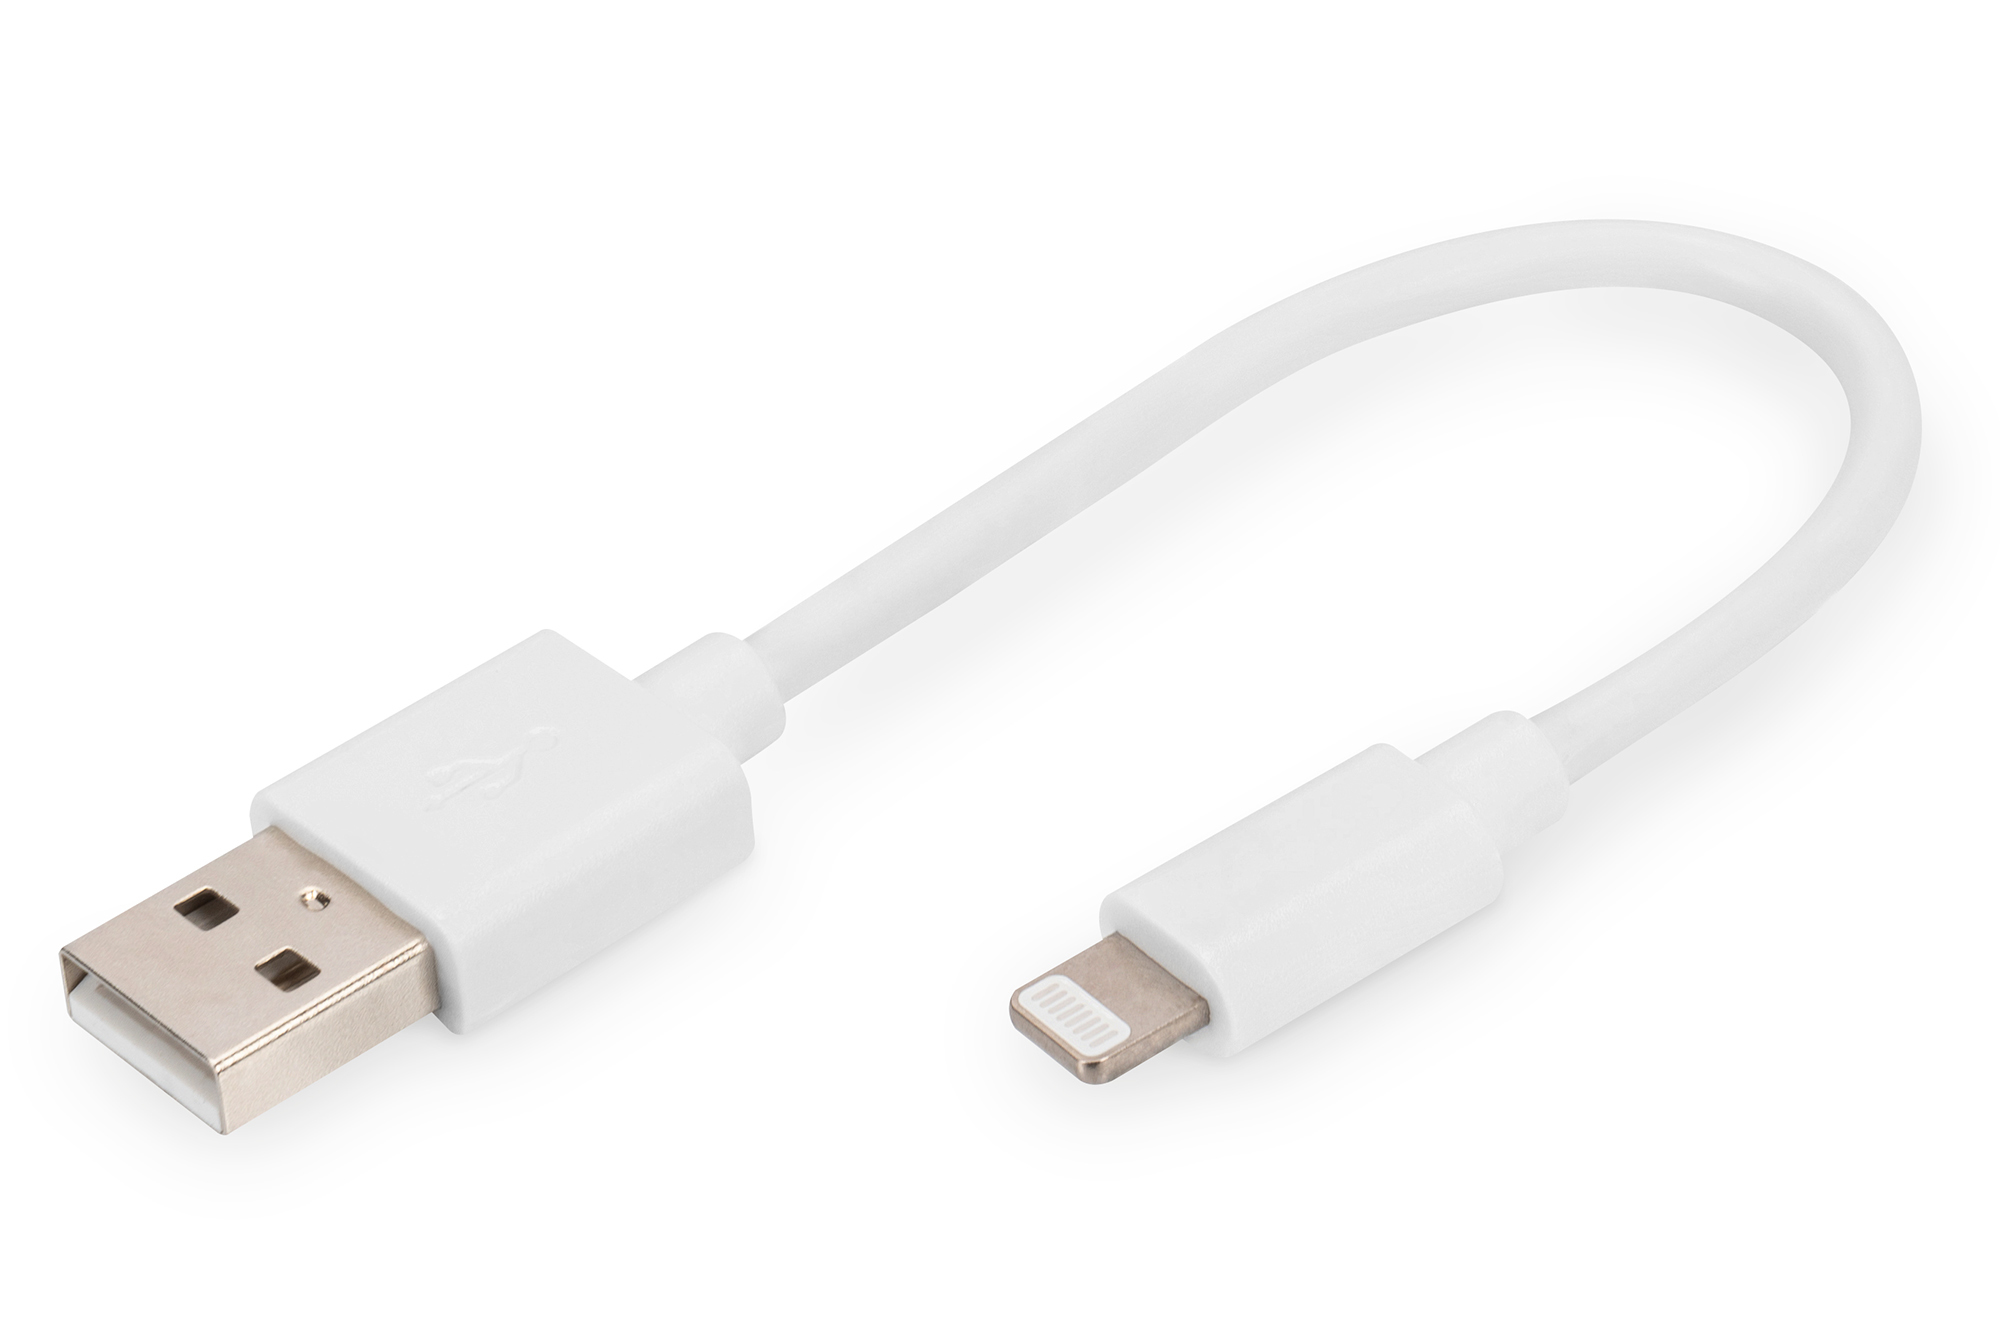 Photos - Cable (video, audio, USB) Digitus Lightning to USB-A data/charging cable, MFI-certified DB-600106-00 